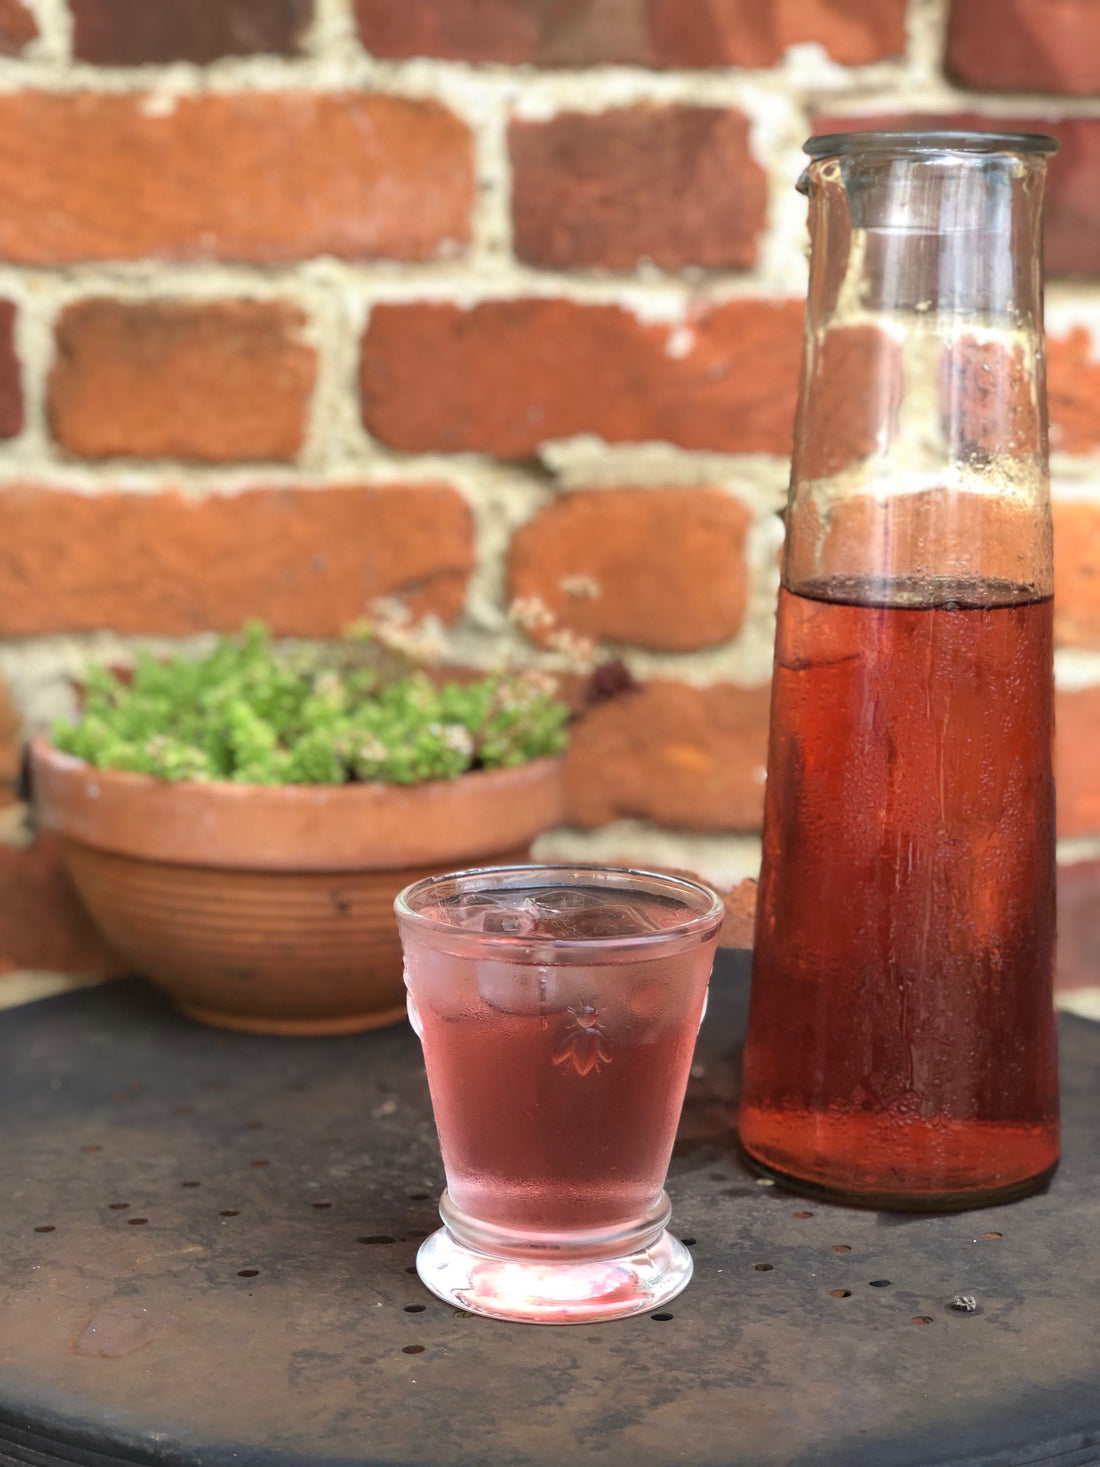 An easy iced tea recipe to beat the heatwave